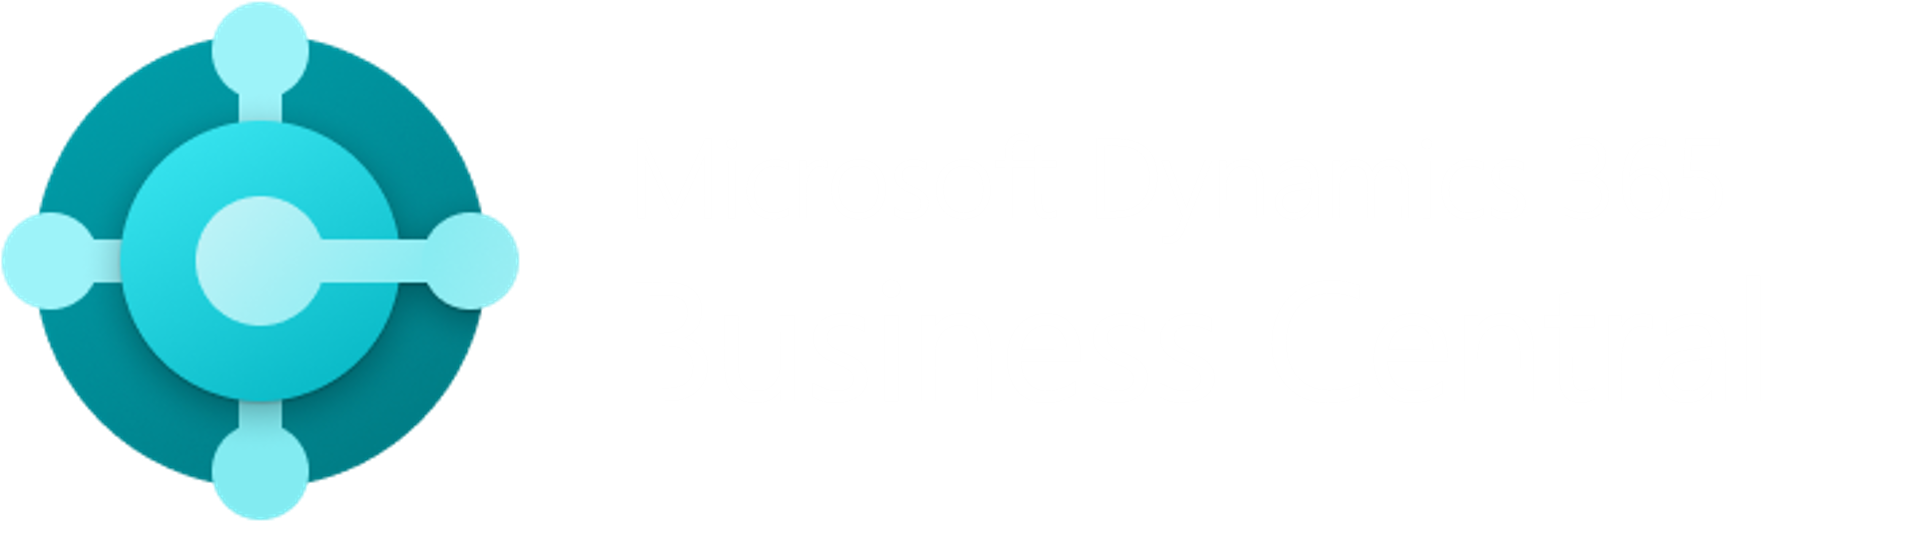 Dynamics 365 Business Central icon logo